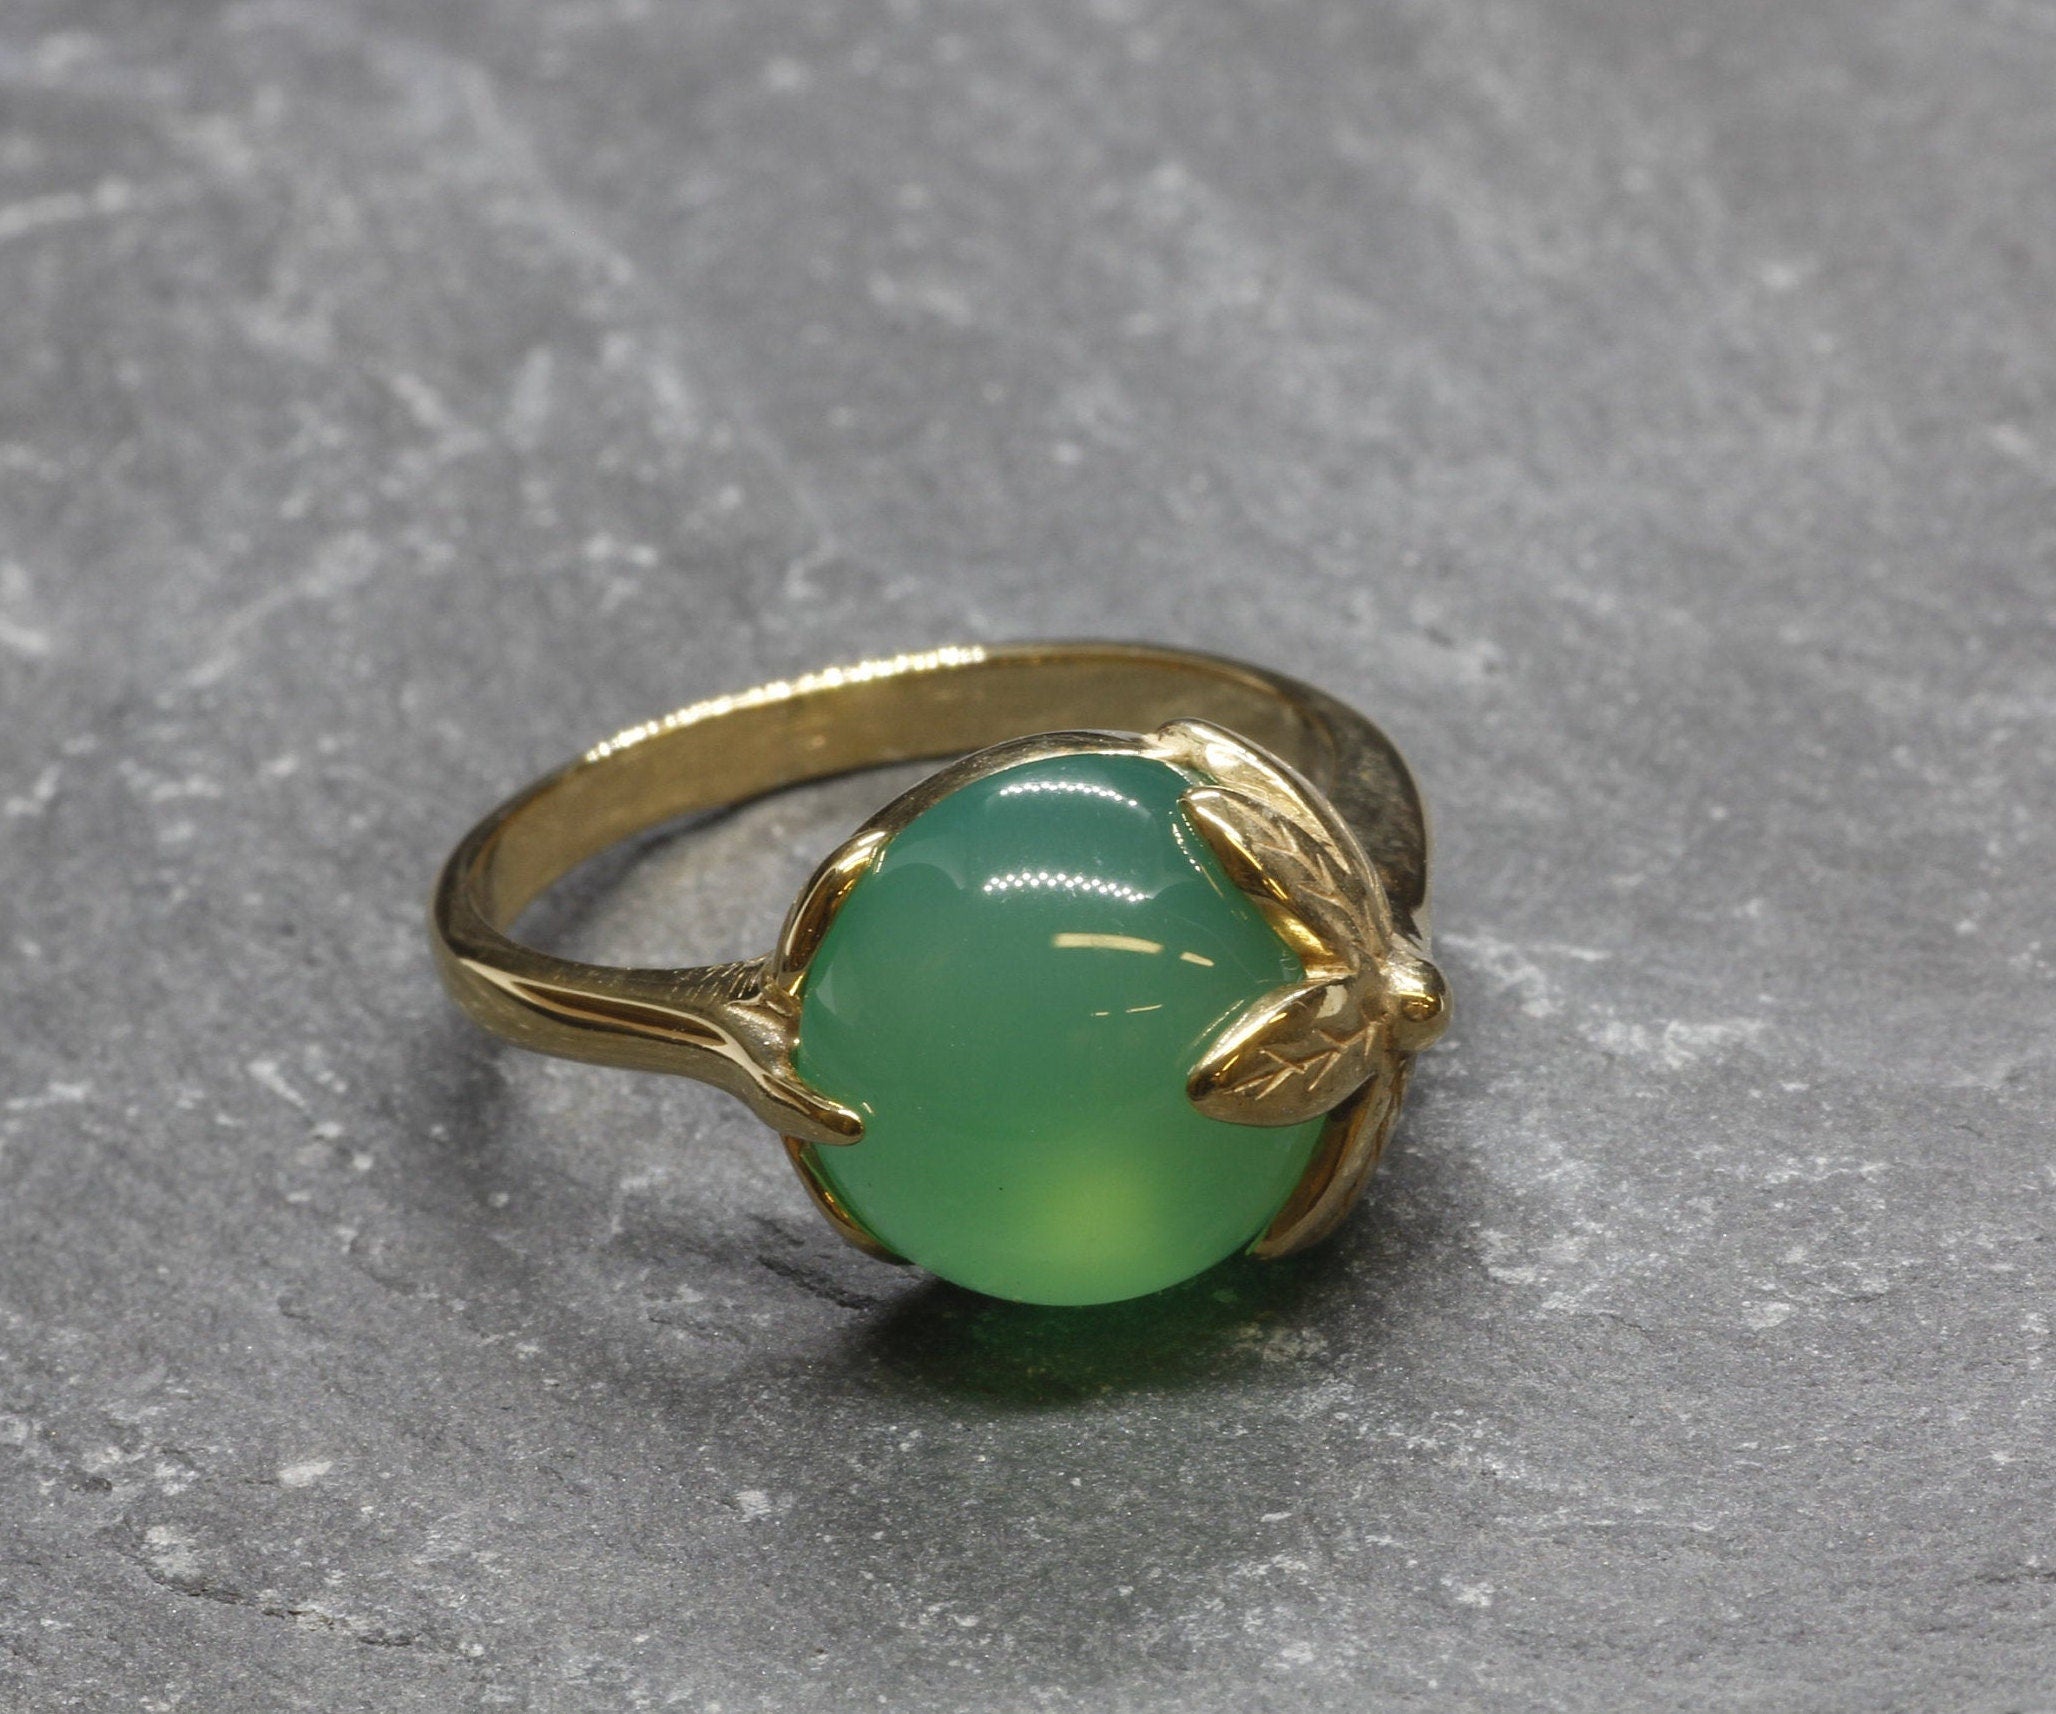 Gold Emerald Ring, Created Emerald, Green Flower Ring, Gold Plated Ring, Leaf Ring, Vintage Ring, Gold Leaf Ring, Antique Ring, Vermeil Ring